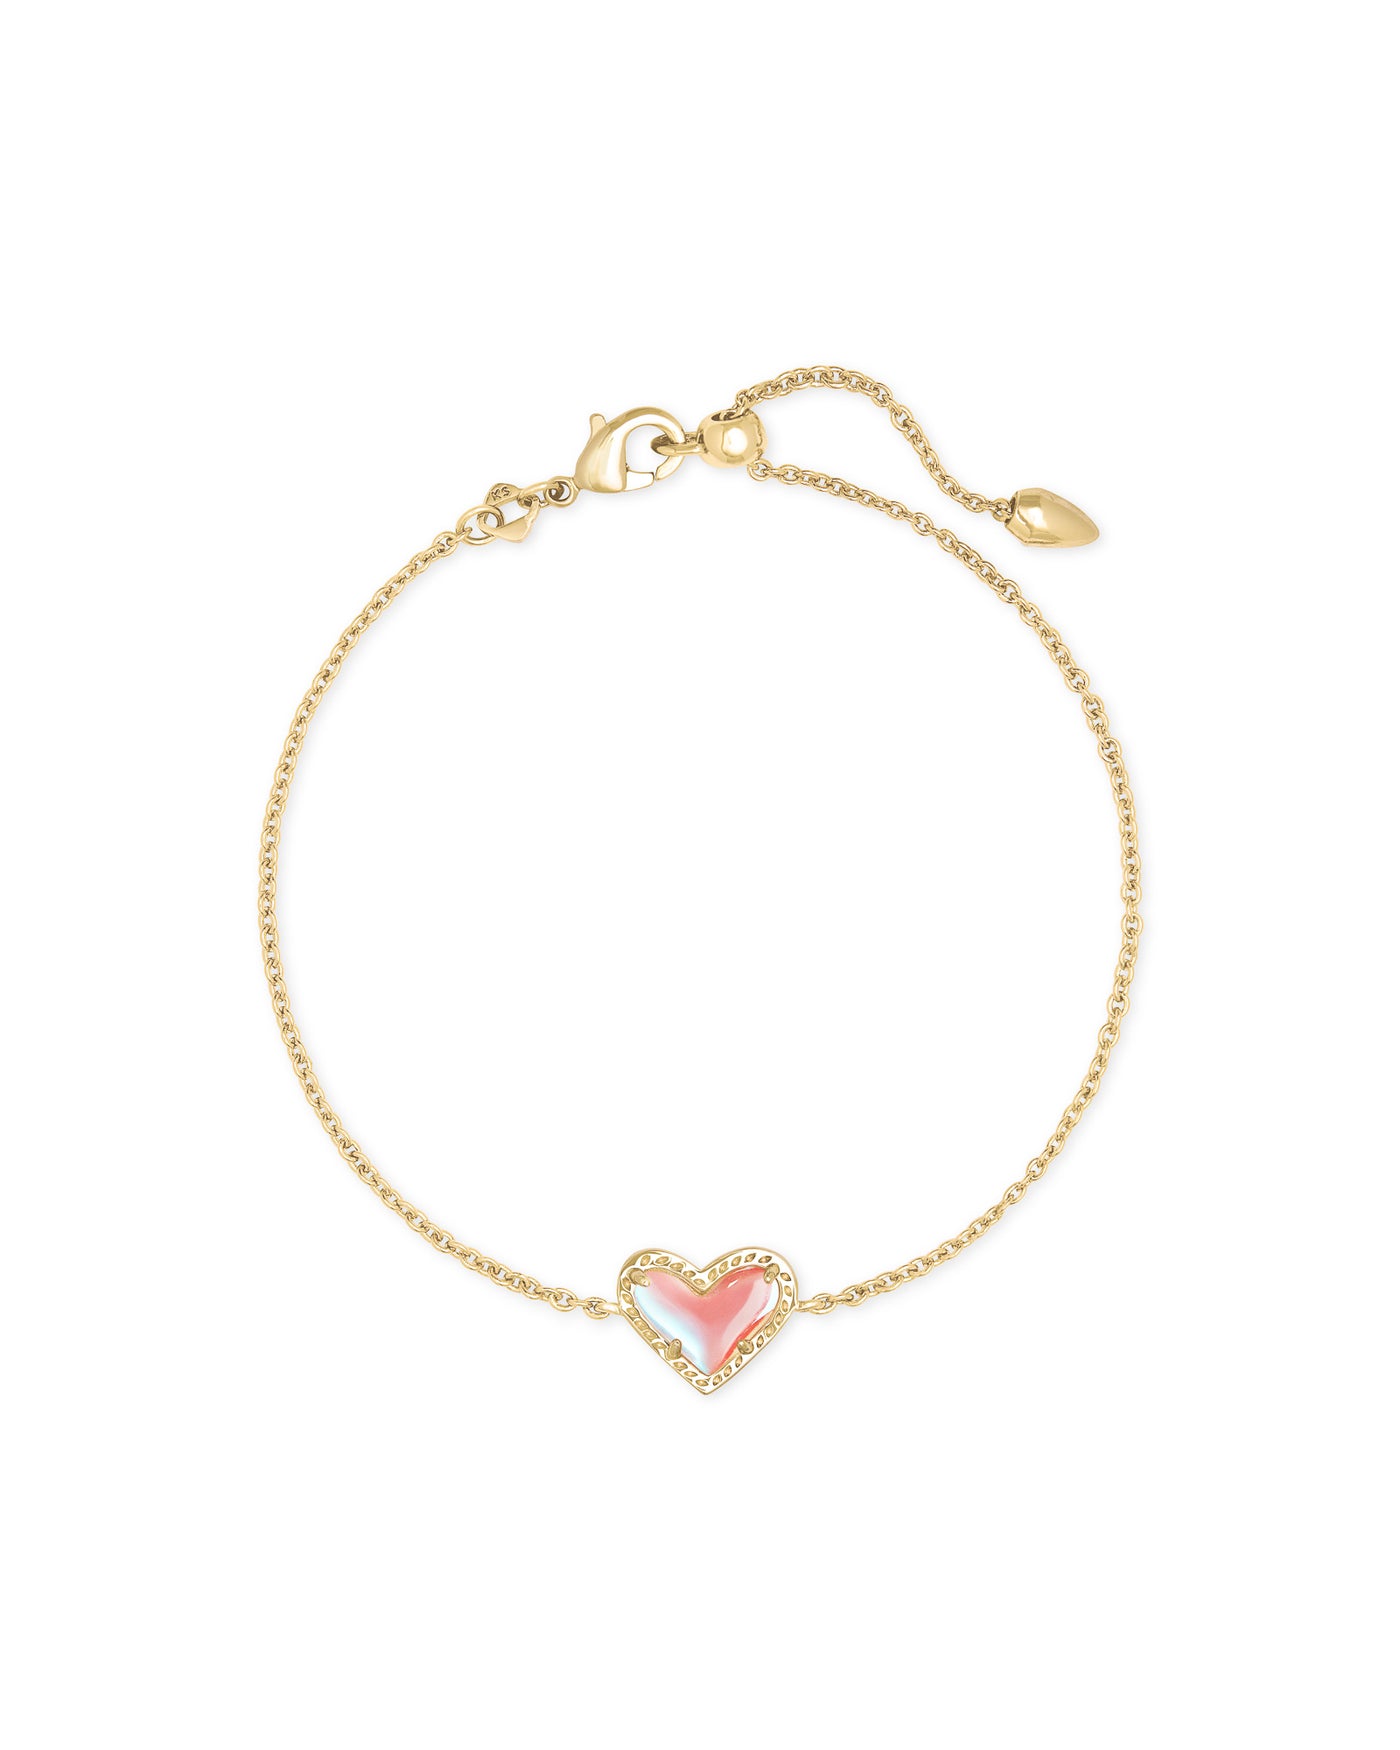 Kendra Scott Ari Heart Chain Bracelet in Gold Dichroic Glass-Bracelets-Kendra Scott-Market Street Nest, Fashionable Clothing, Shoes and Home Décor Located in Mabank, TX